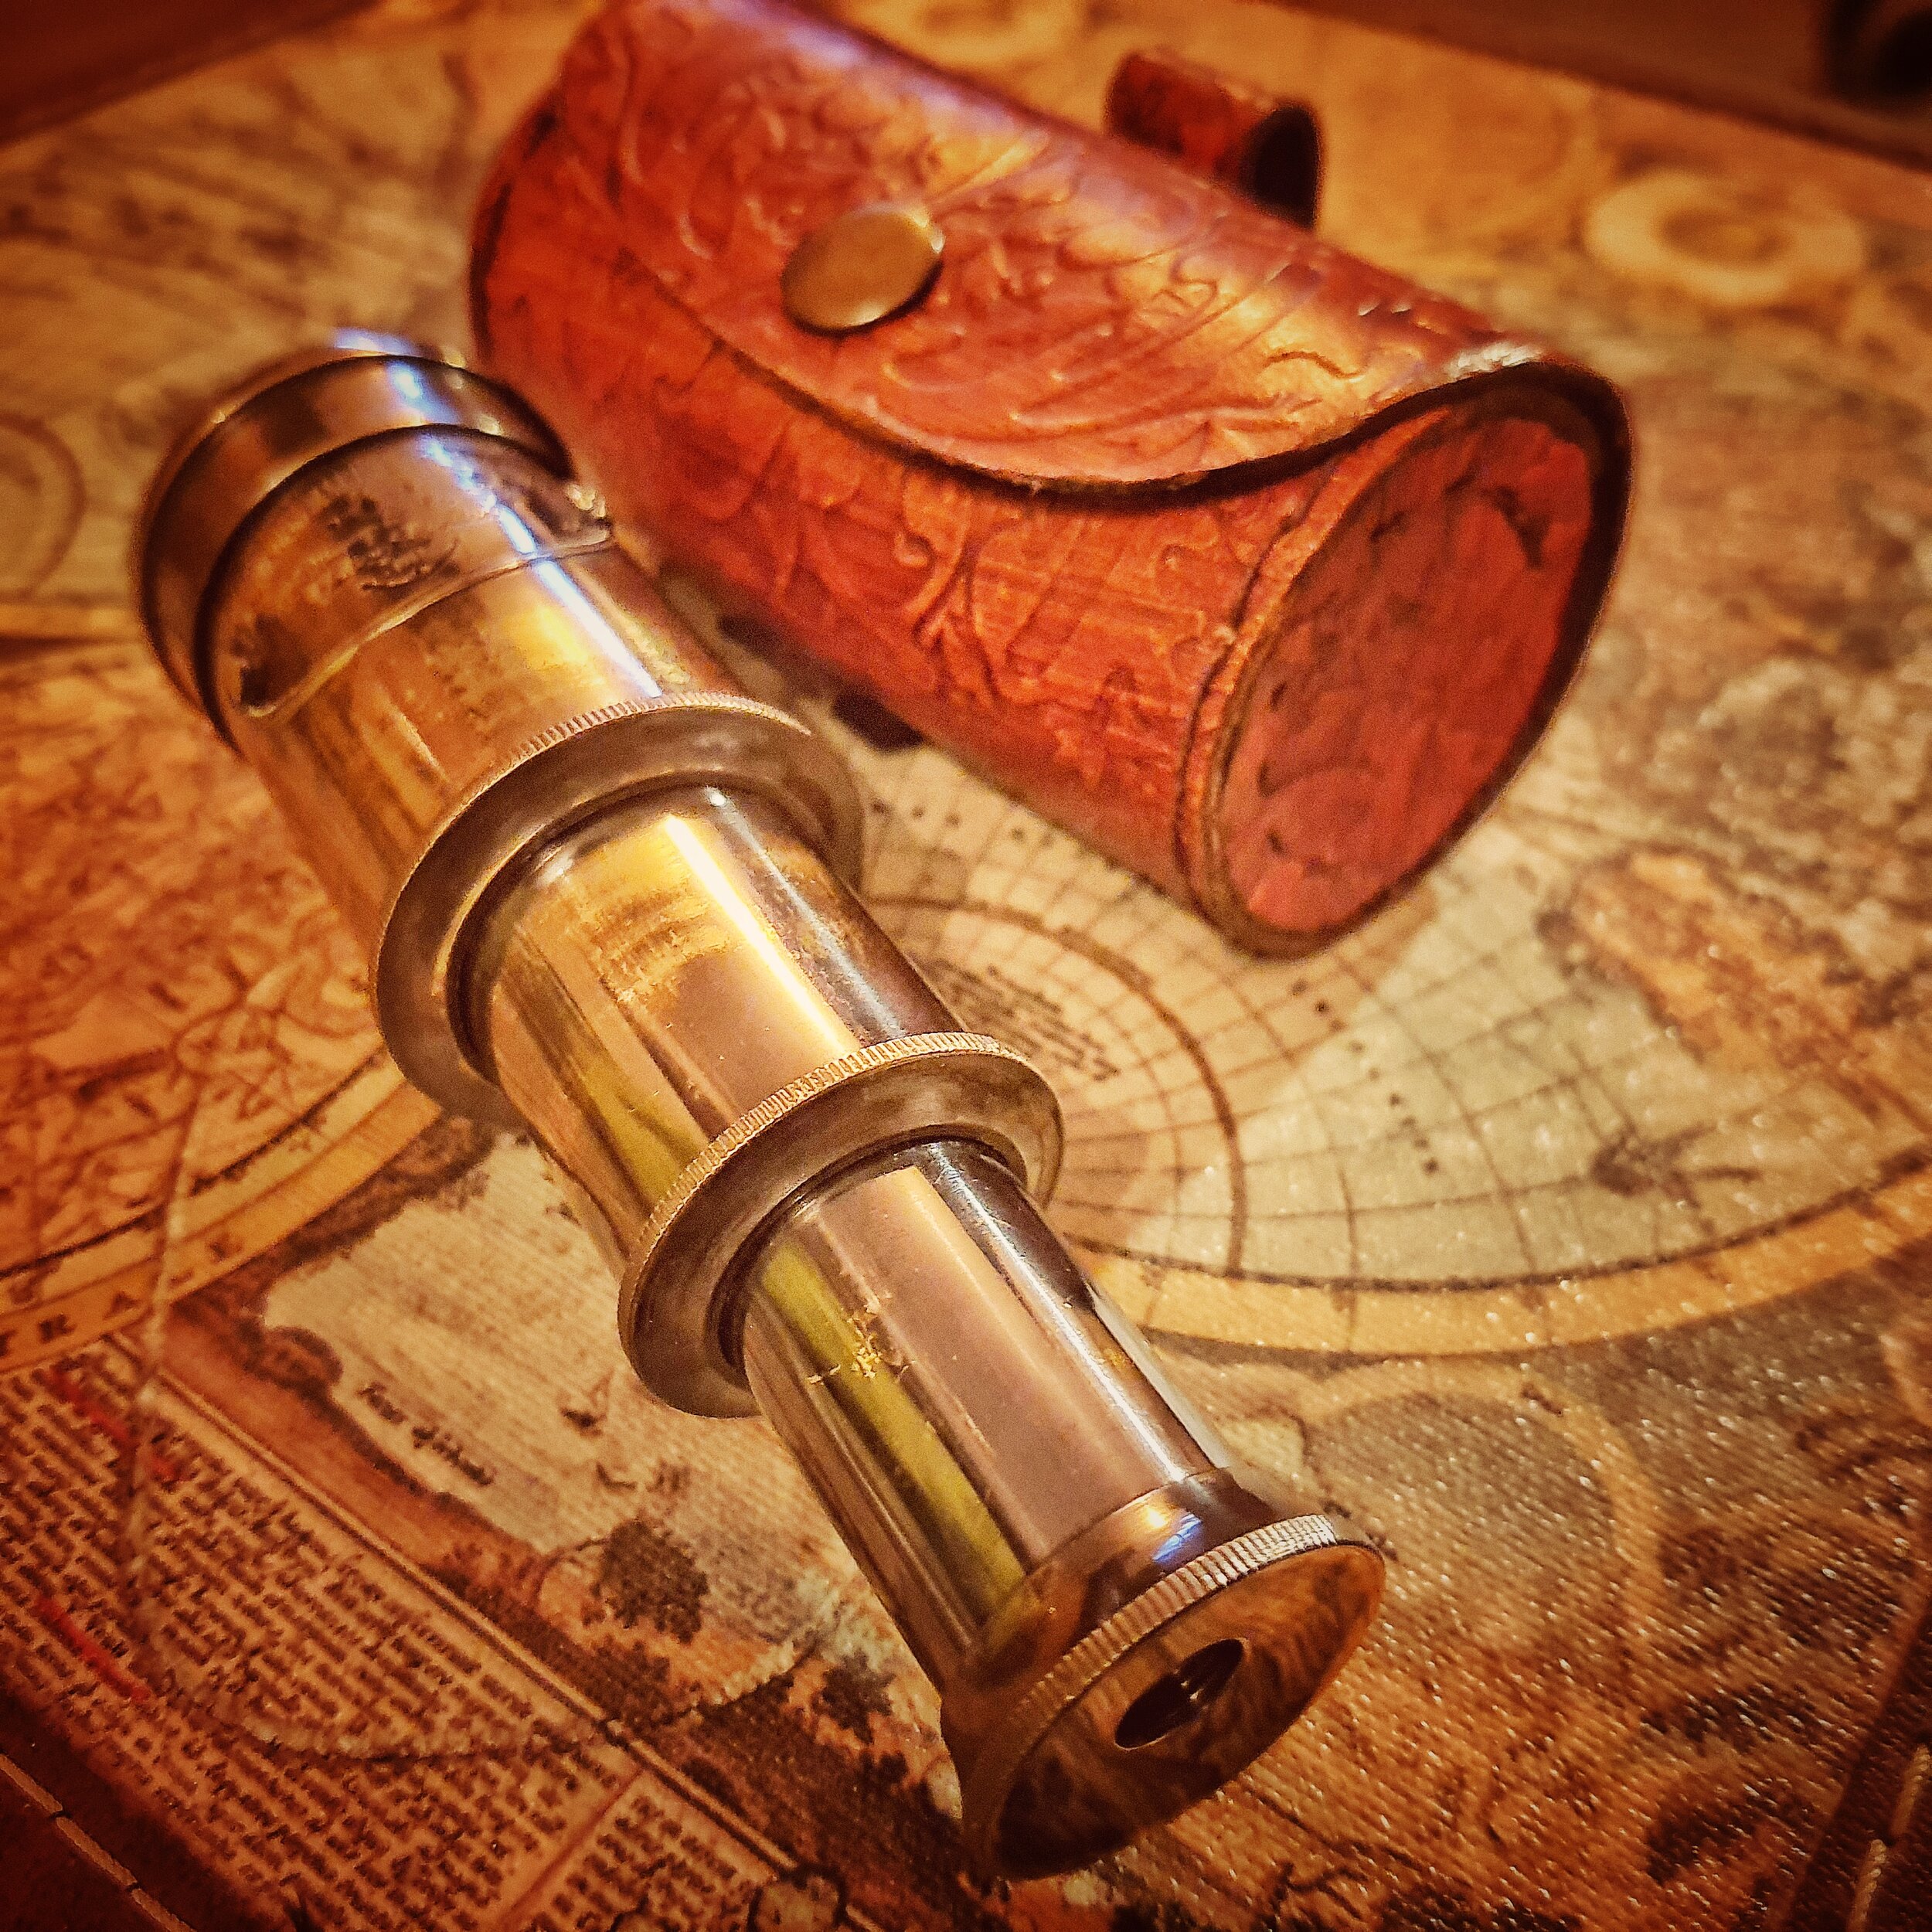 Details about   Antique Solid Brass Vintage Dollond London Telescope w/ Handmade Wooden Box Gift 